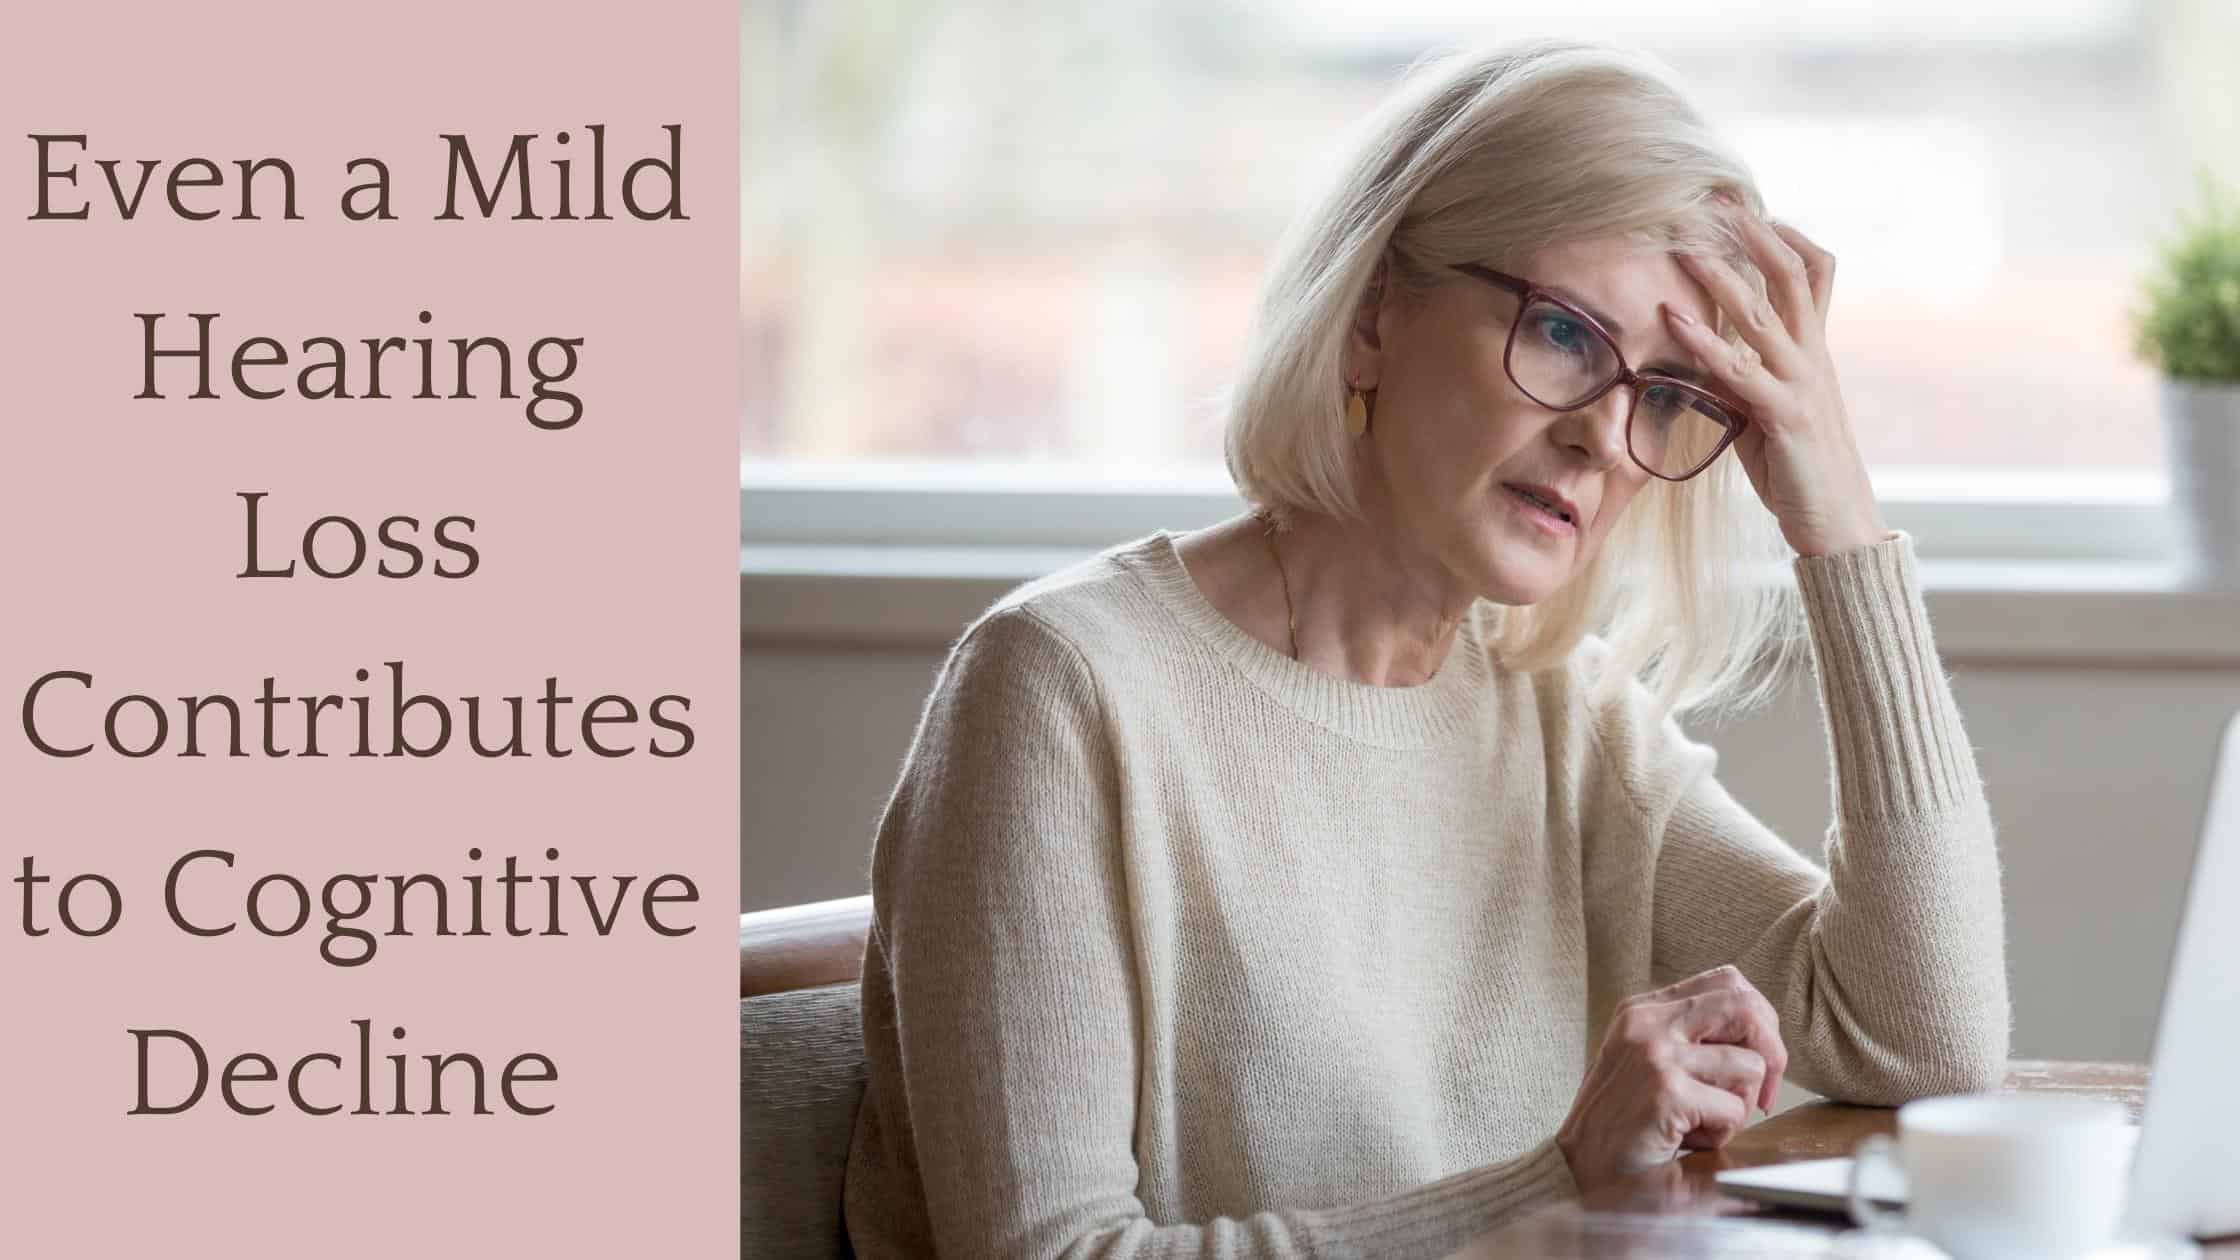 Featured image for “Even a Mild Hearing Loss Contributes to Cognitive Decline”